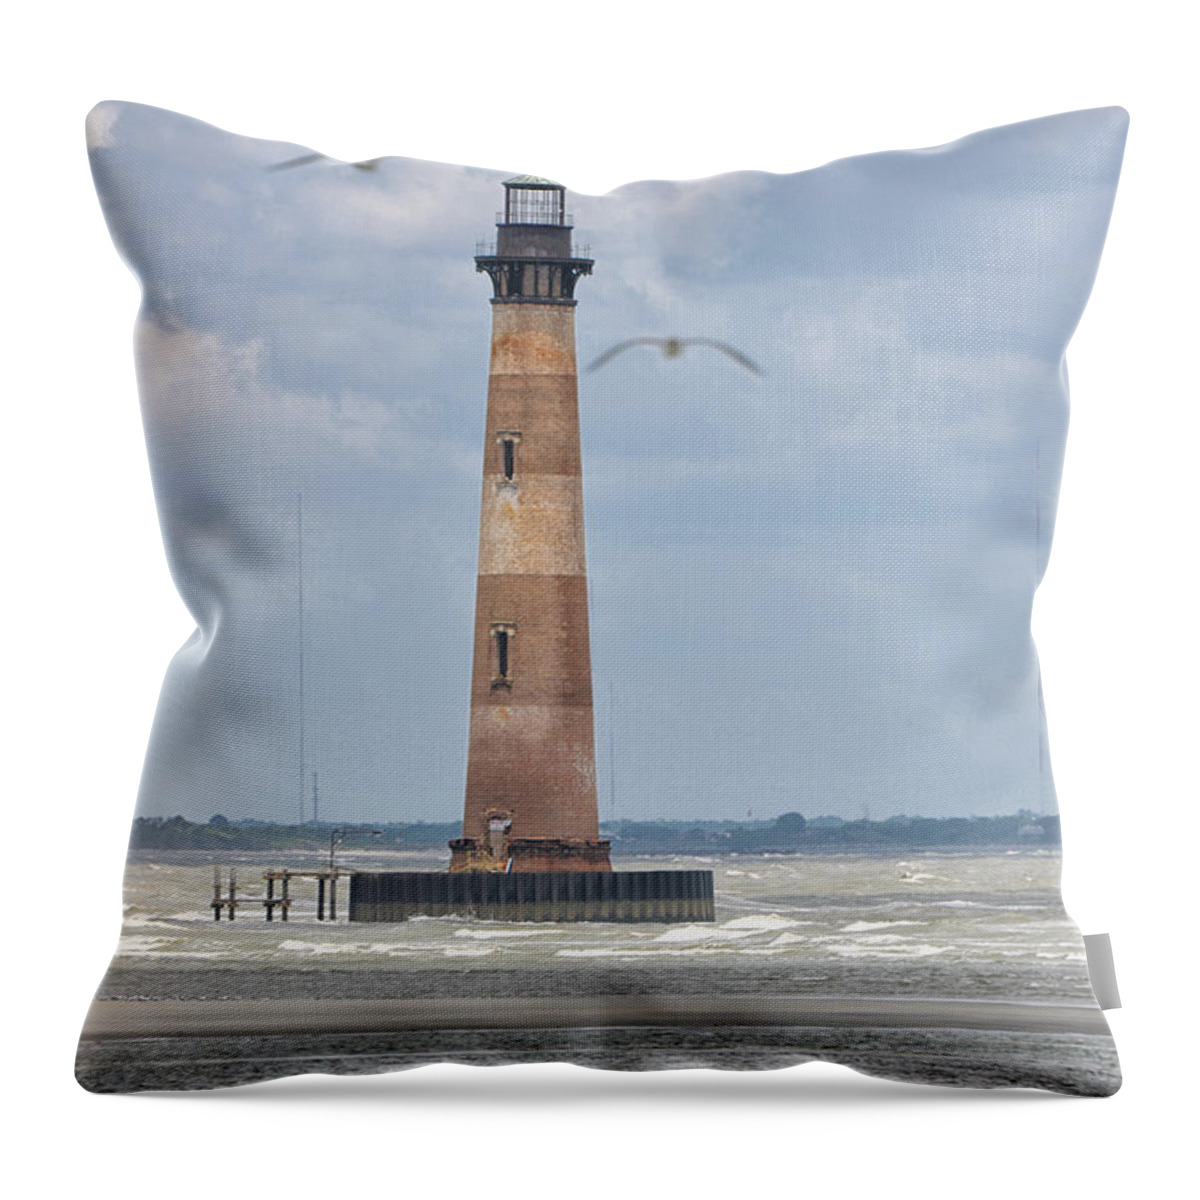 Morris Island Lighthouse Throw Pillow featuring the photograph Maritime Lighthouse Symbol by Dale Powell